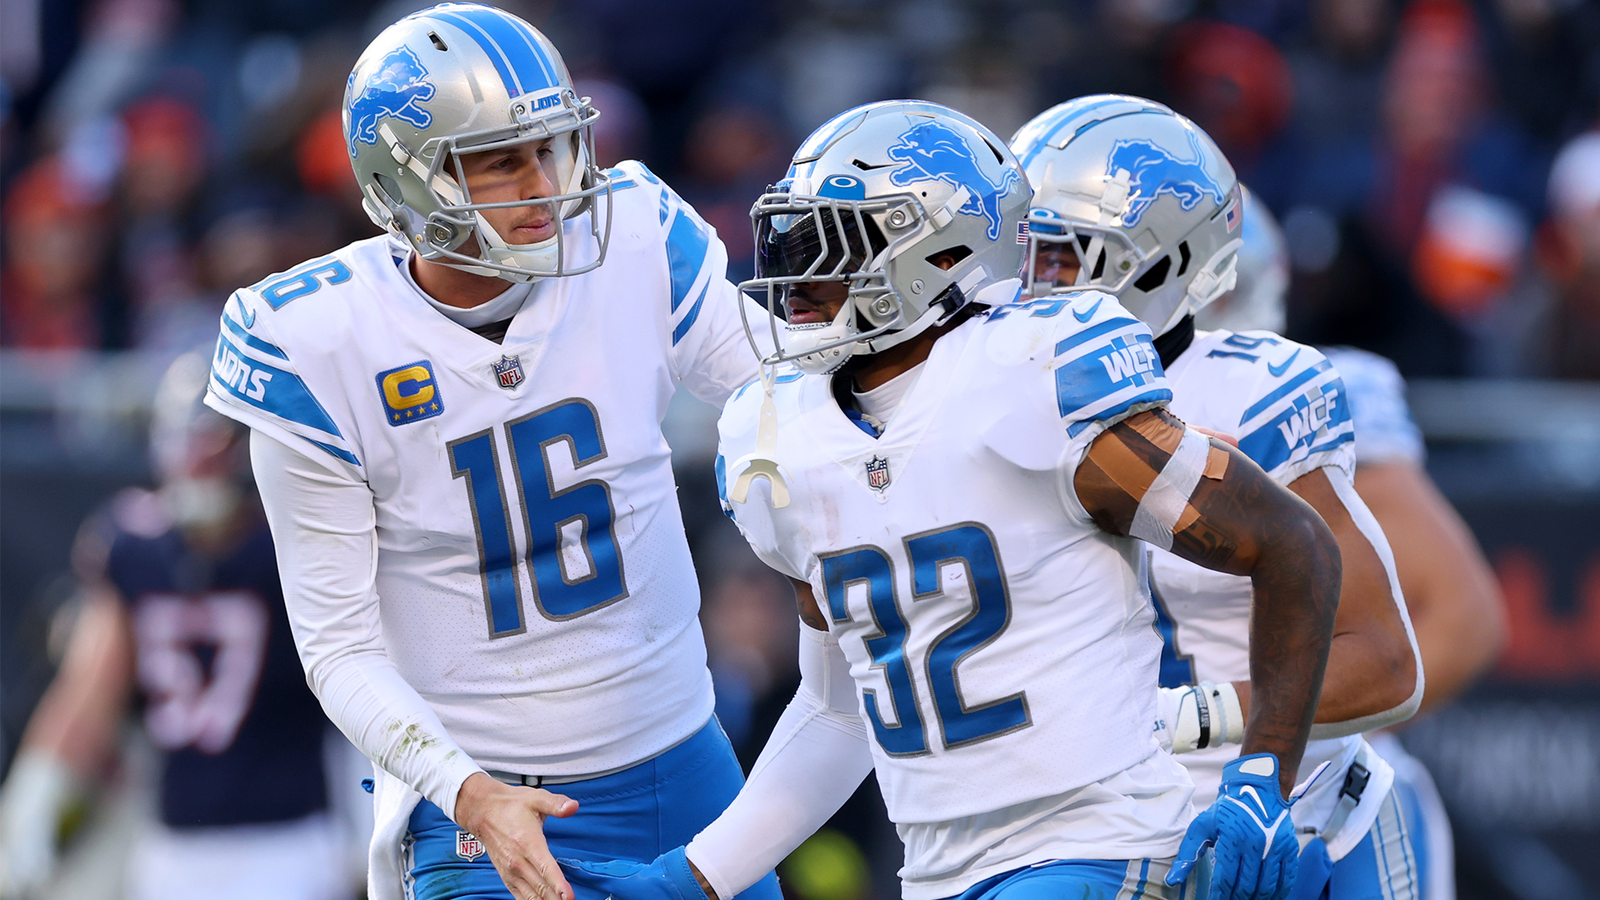 Detroit Lions rally to beat the Chicago Bears 31-30